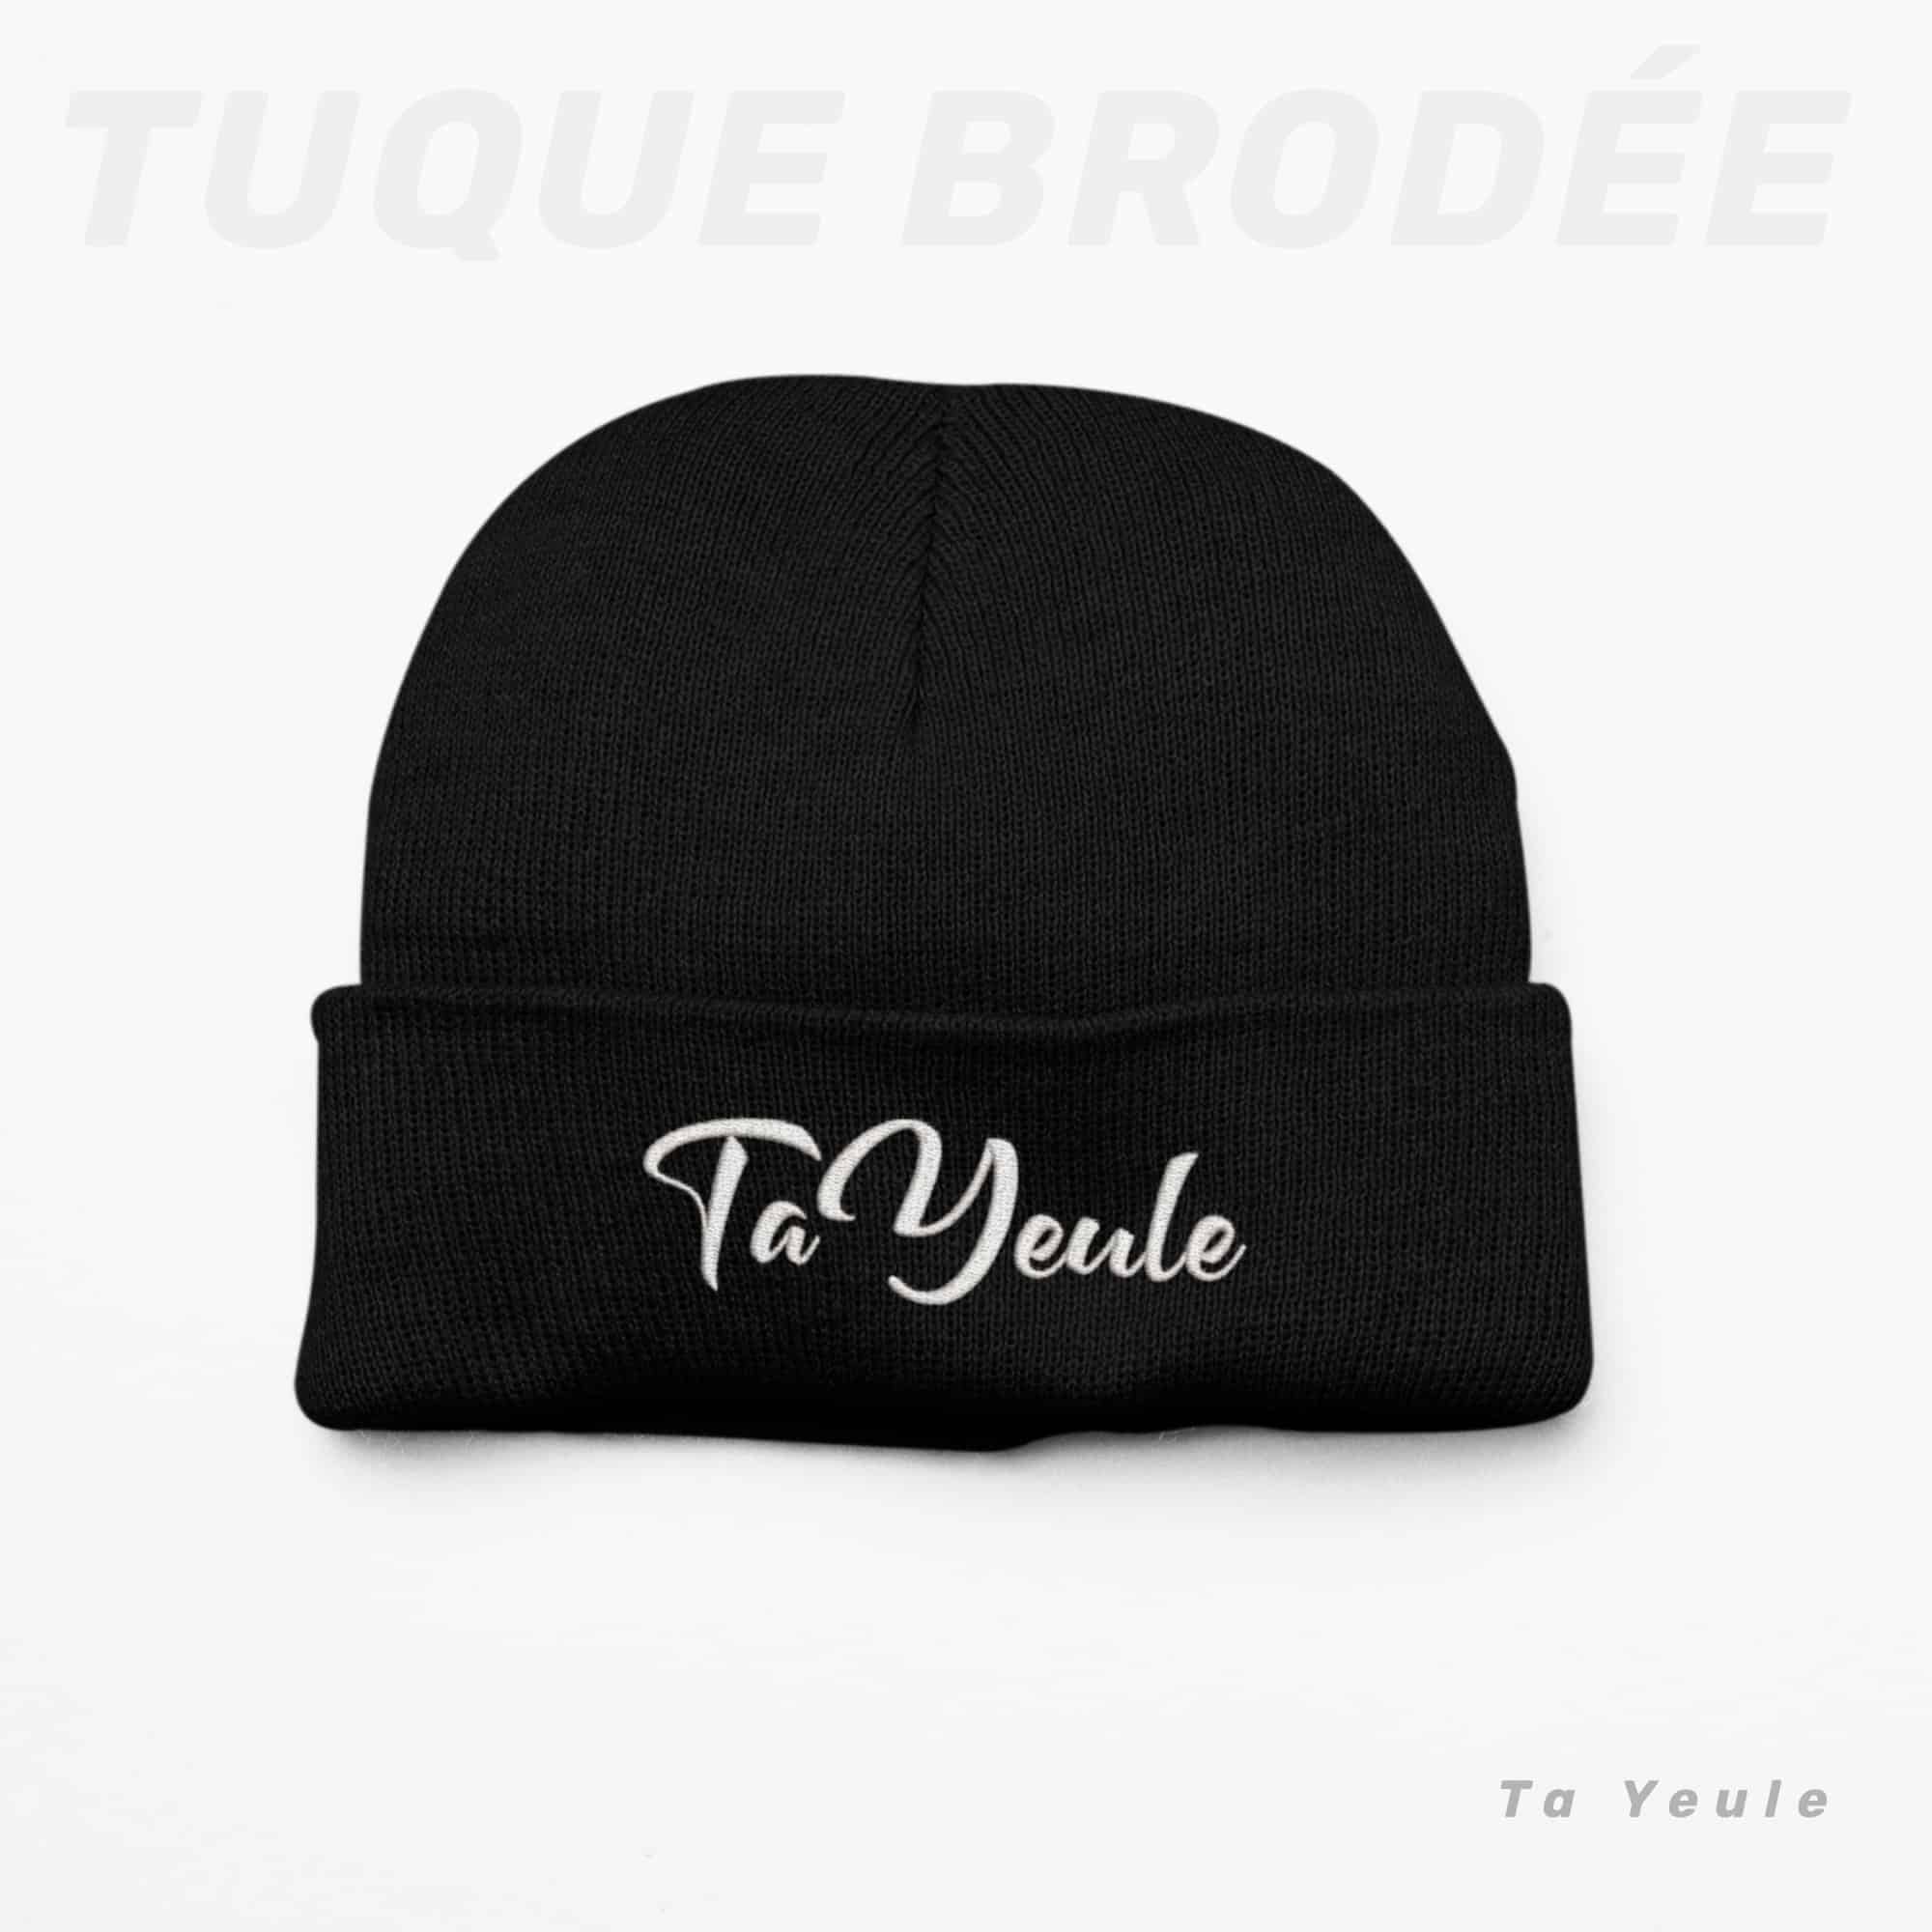 Tuque ta yeule